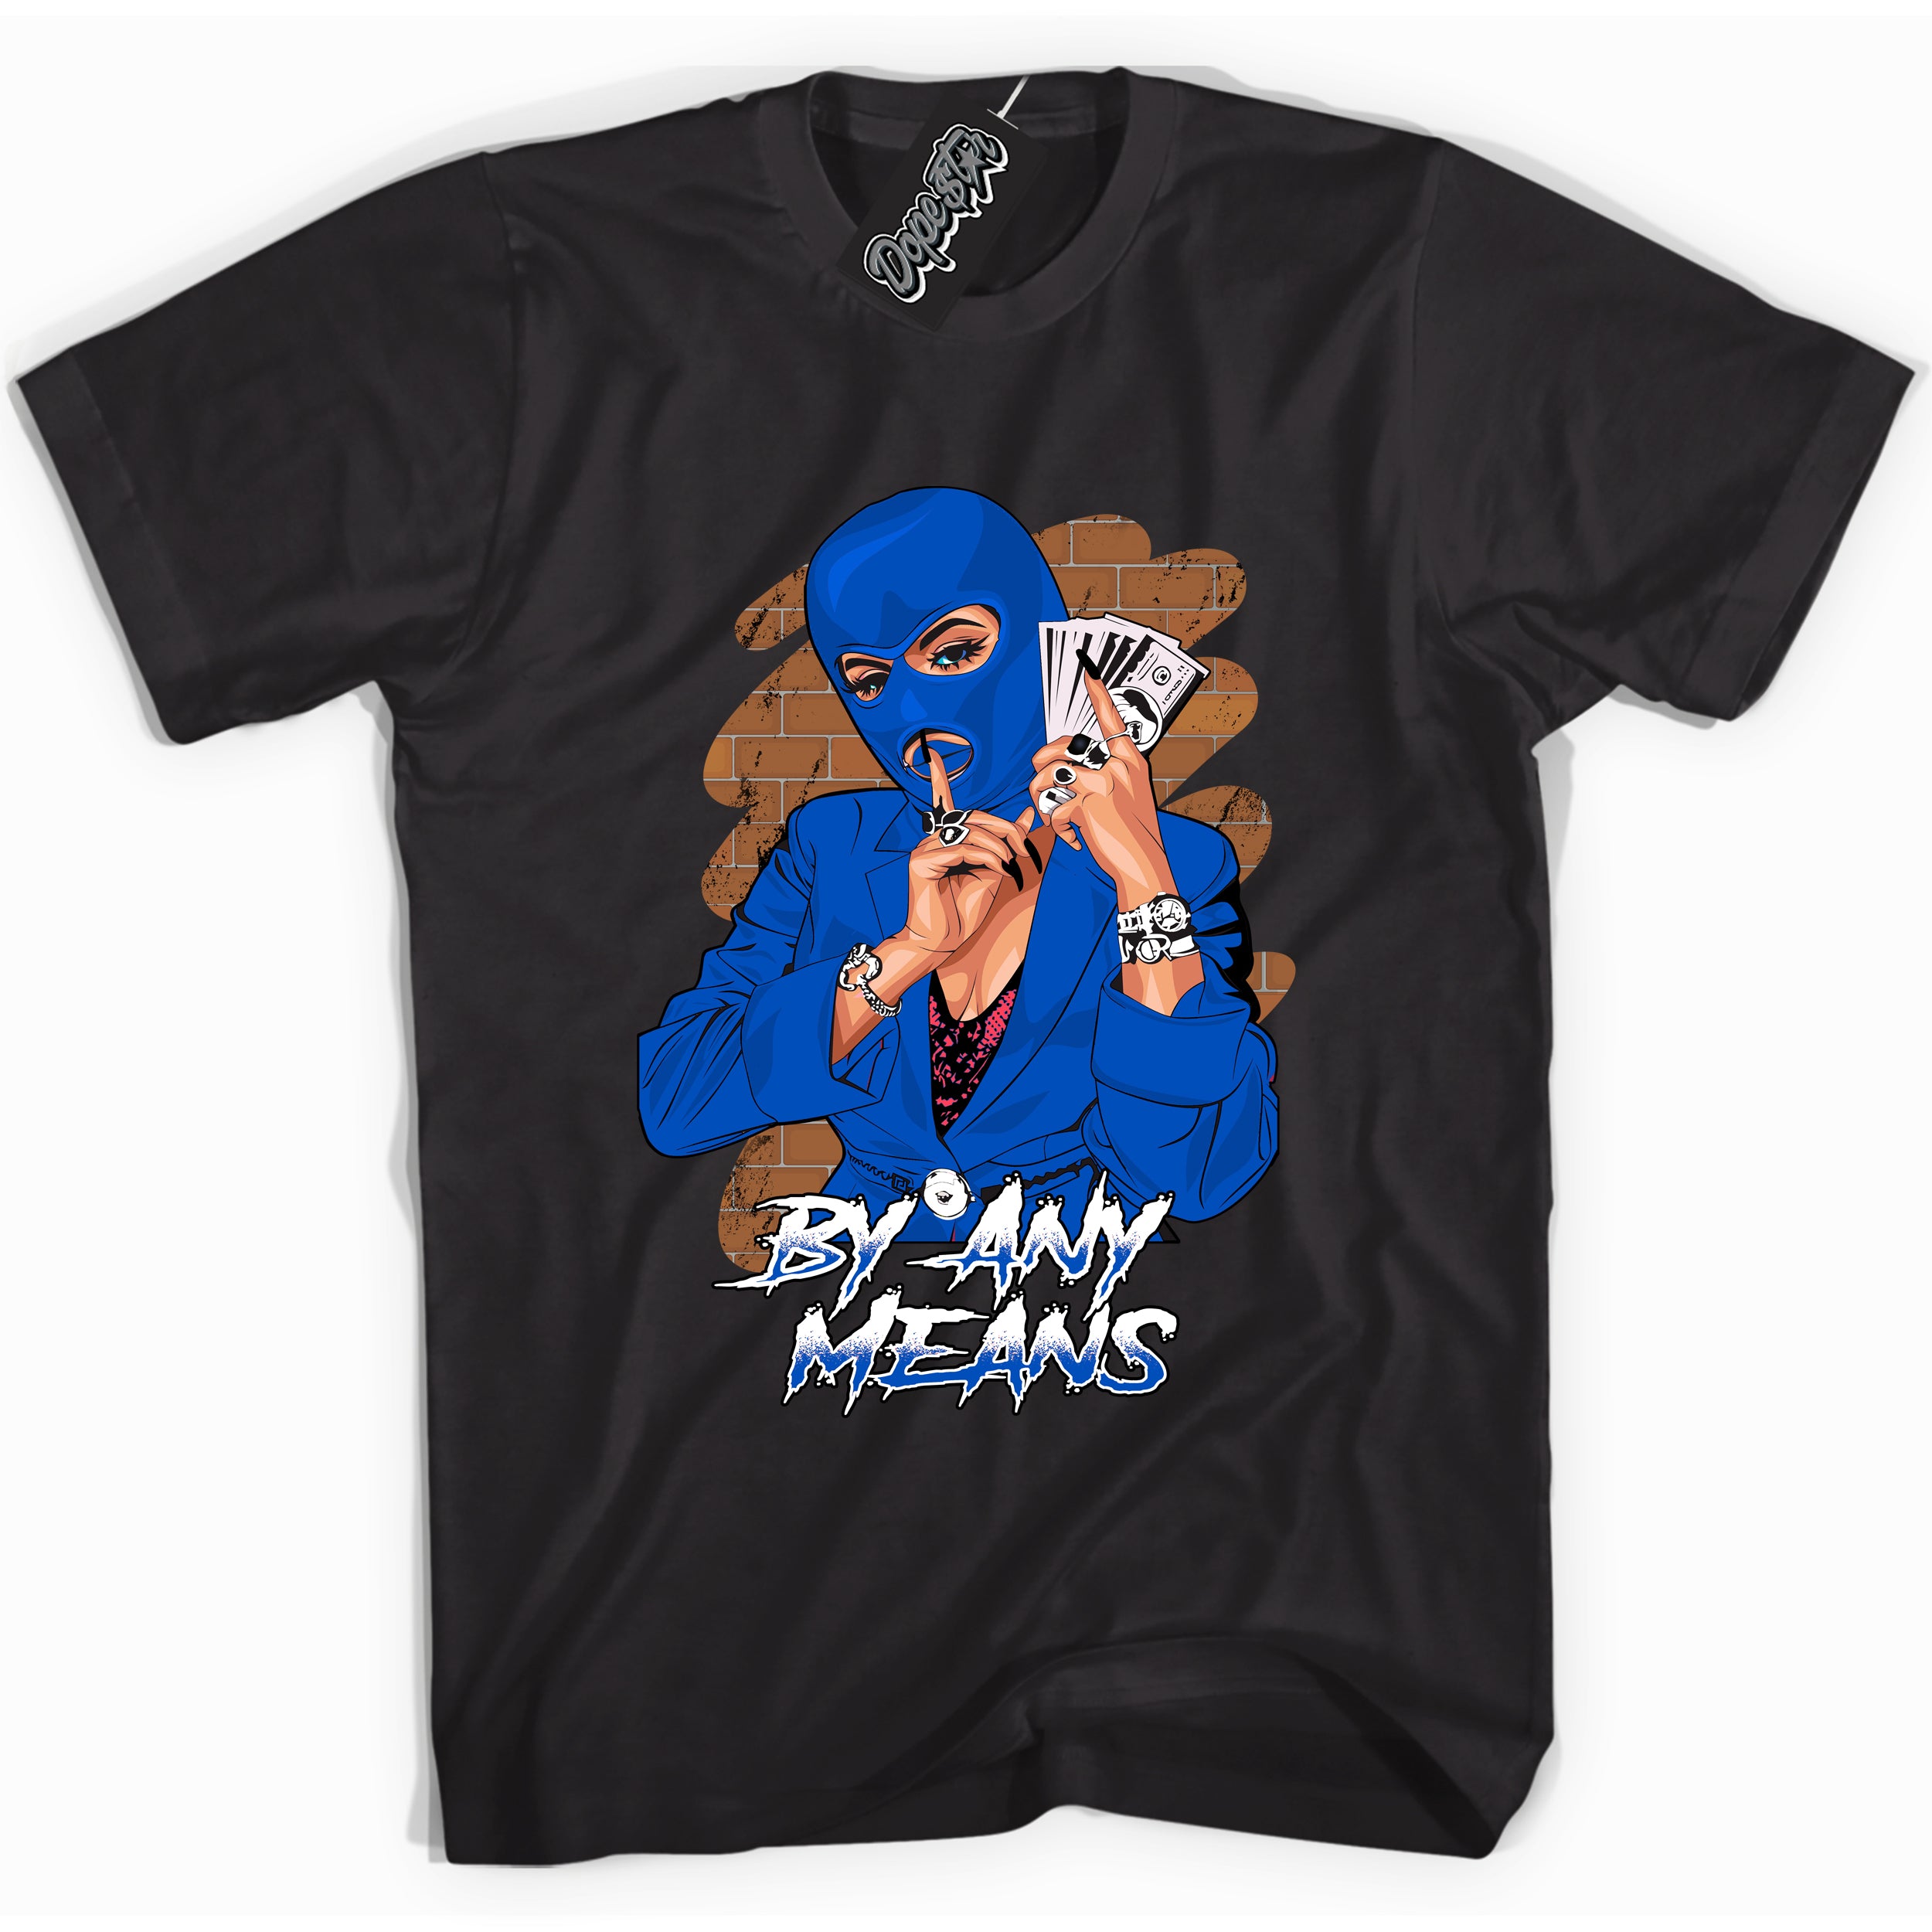 Cool Black graphic tee with "By Any Means" design, that perfectly matches Royal Reimagined 1s sneakers 